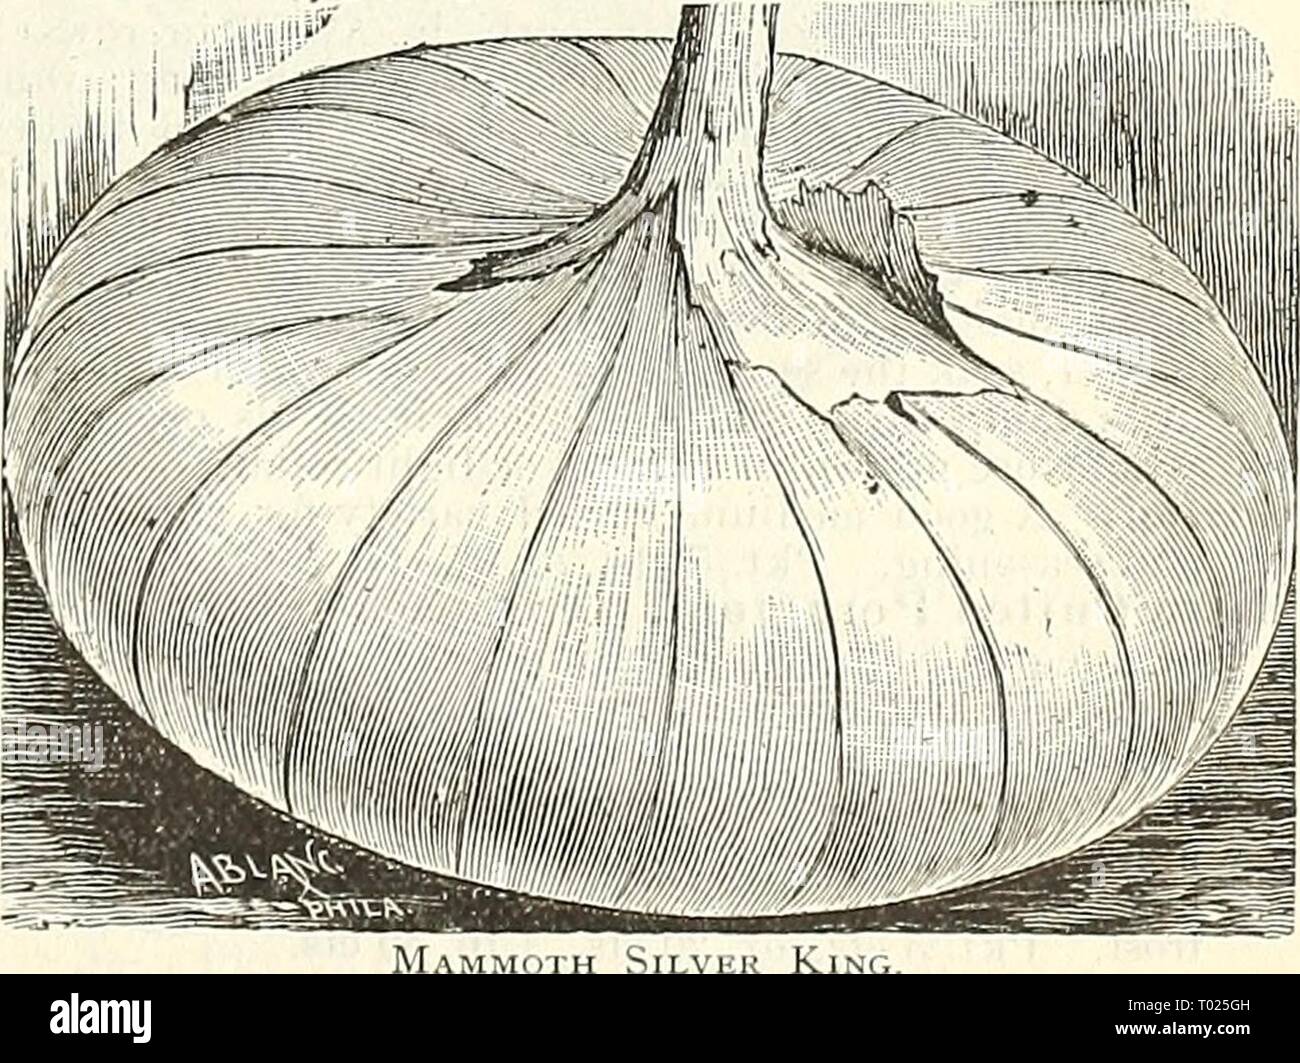 Dreer's garden calendar for 1888 . dreersgardencale1888henr Year: 1888  Large White Tripoli. Mammoth Silver King. This, the largest of the white Italian onions, attains an enormous size in one sea- son from seed, of mild flavor, attractive appearance and form, and a good keeper. This sort is deserving of an extensive cultivation, and will be found espe- cially serviceable in the family garden. Pkt. 10 cts., oz. 40 cts., I lb. $1.40.    Mammoth Silver Kin Postage prepaid on pkts. and ozs. On l/i lb. and upward remit for postage i ct. per oz. when ordered to be sent by mail. Stock Photo